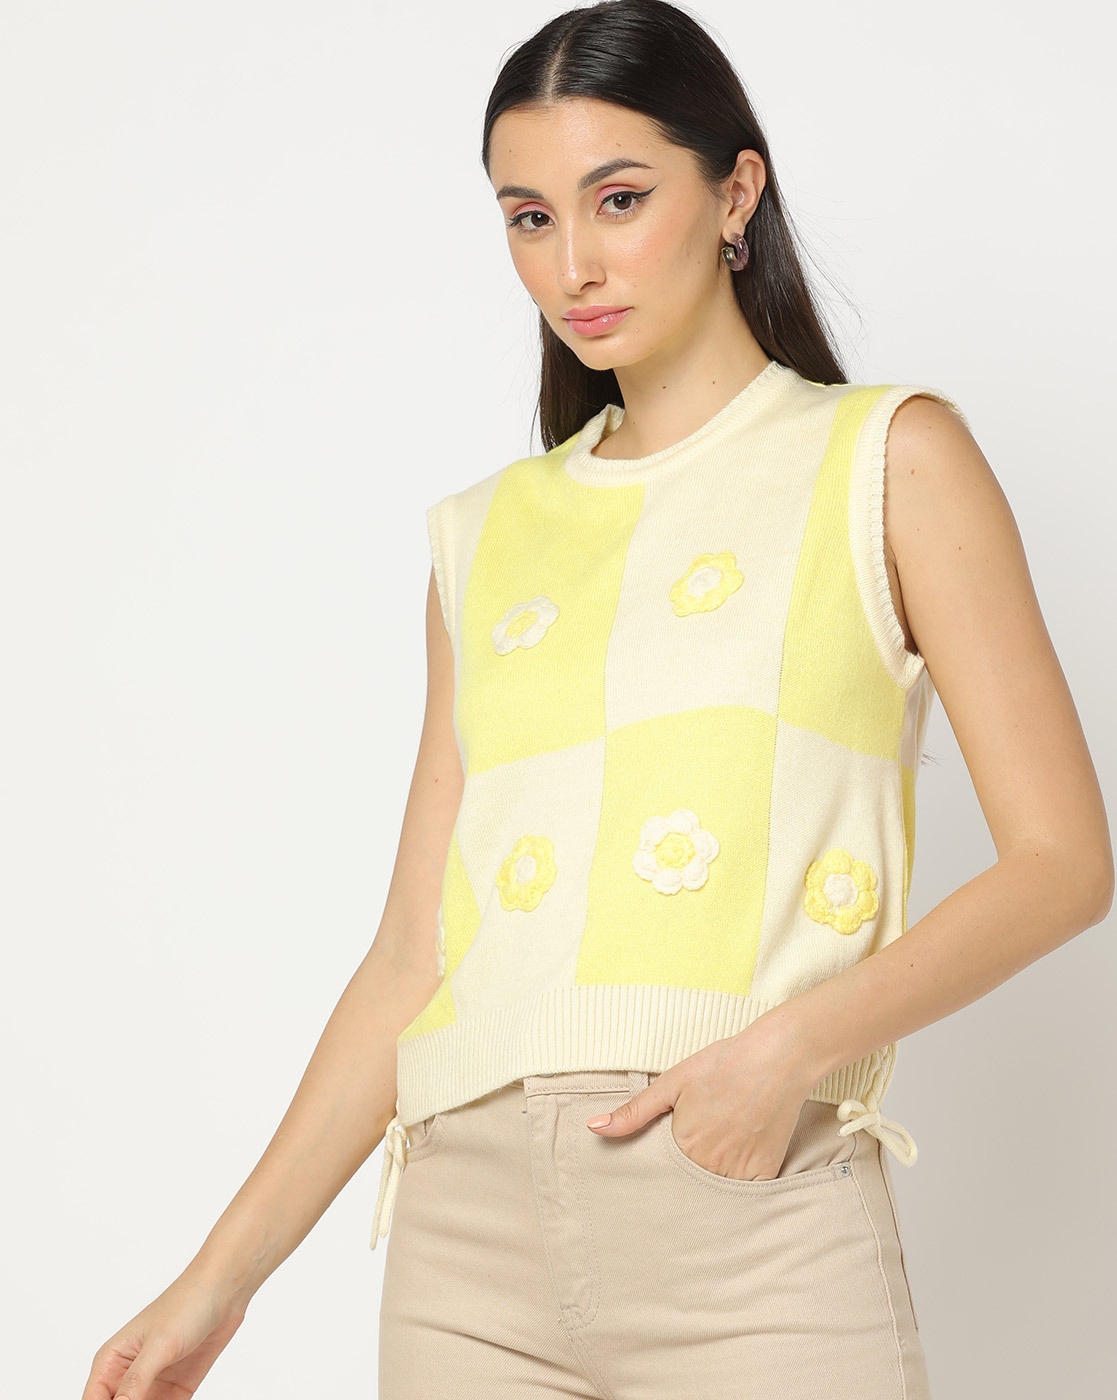 Buy EZINNIA Richelle Fancy Ladies Sweater from Richelle Yellow at